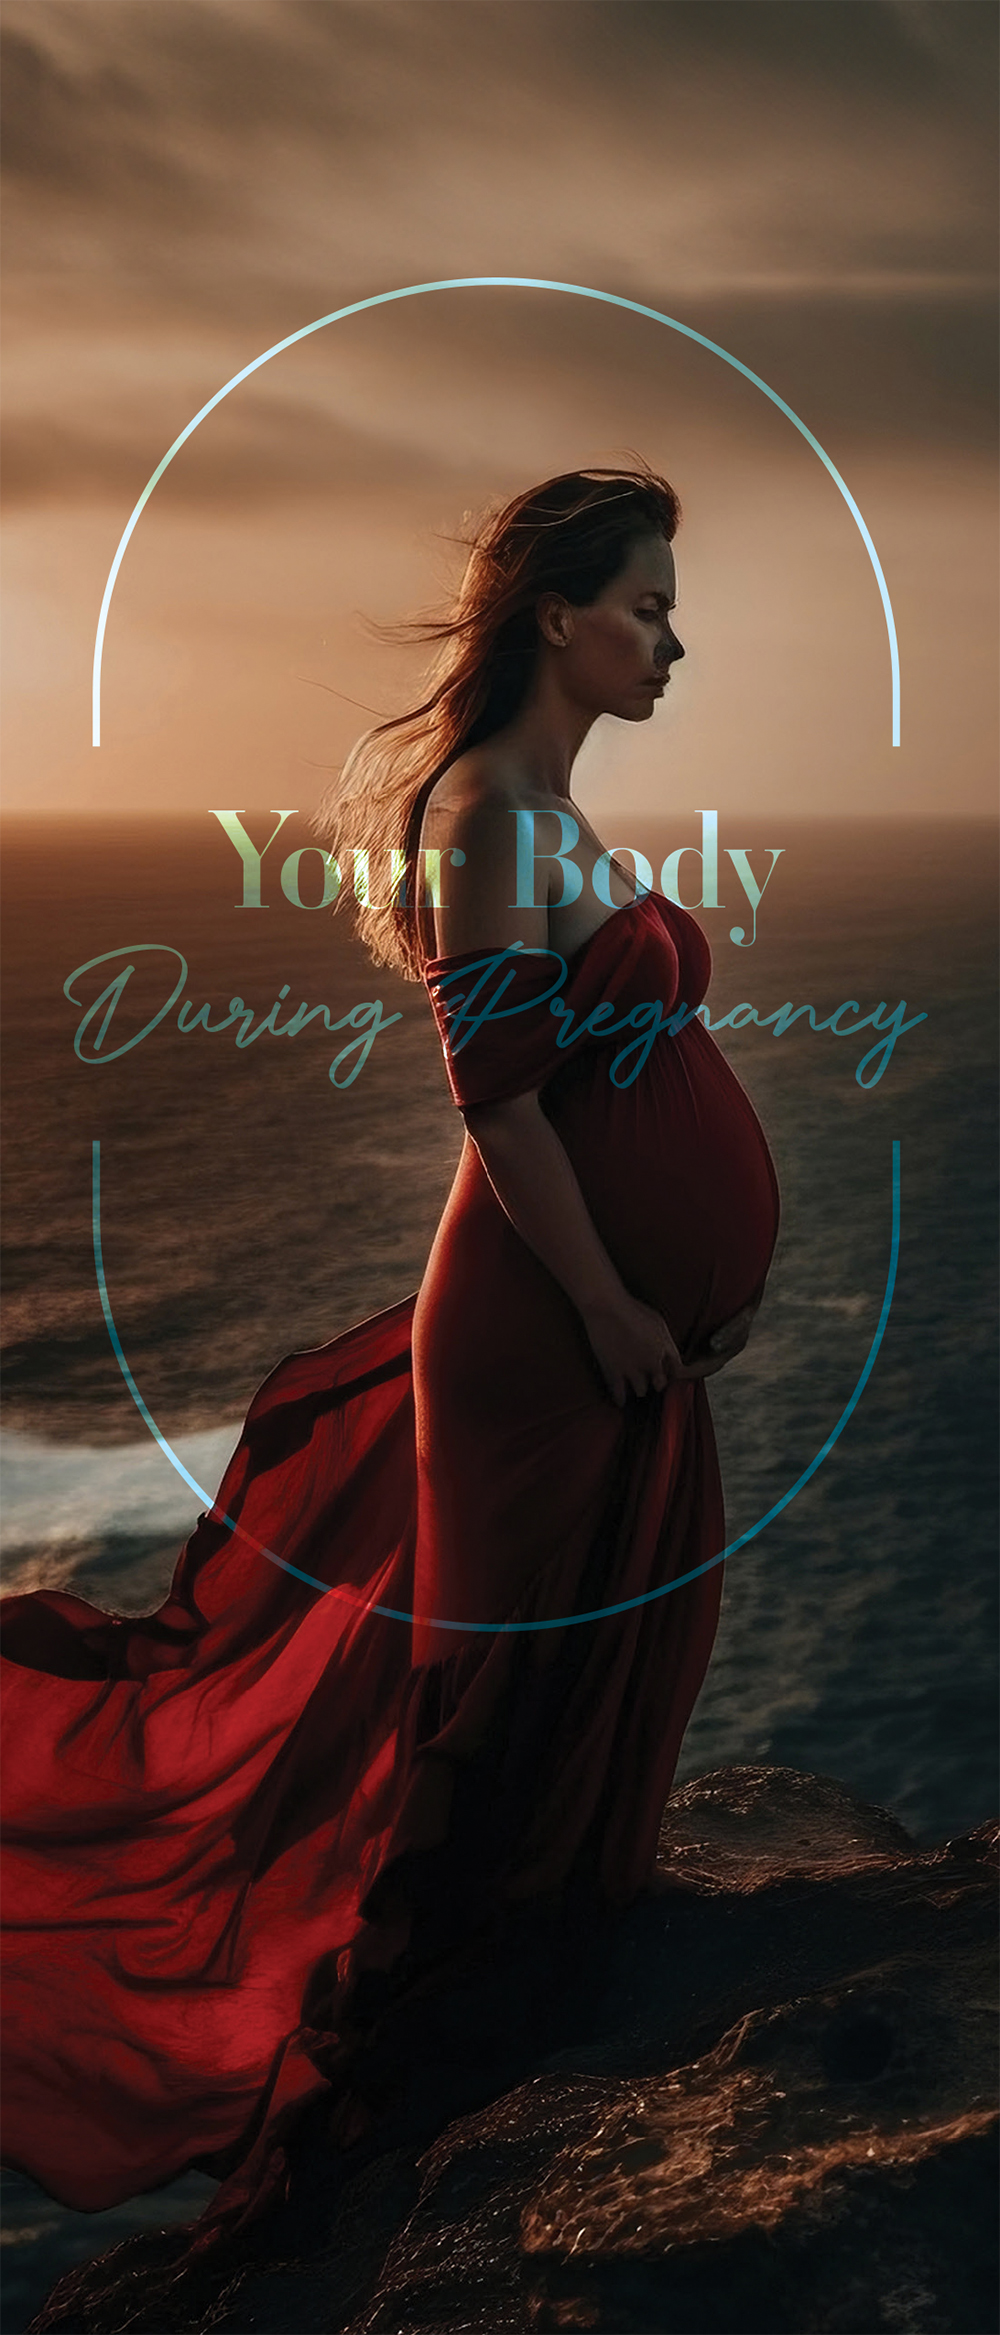 Literature, Your Body and Pregnancy: Pack of (50)